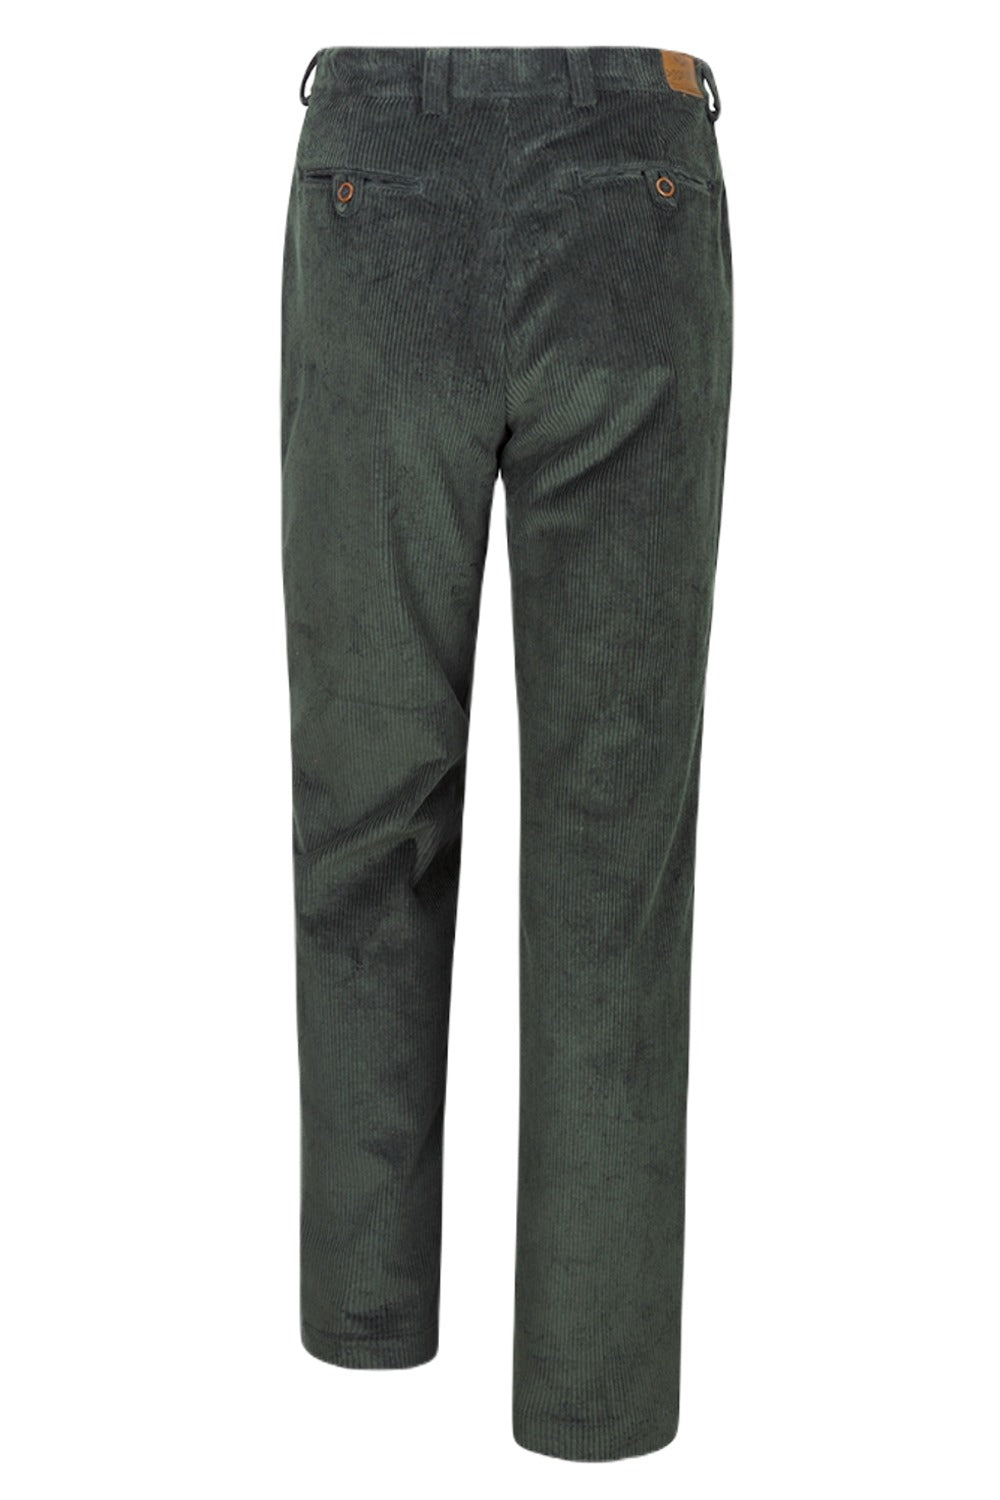 Hoggs of Fife Callander Heavyweight Cord Trousers in Olive Green